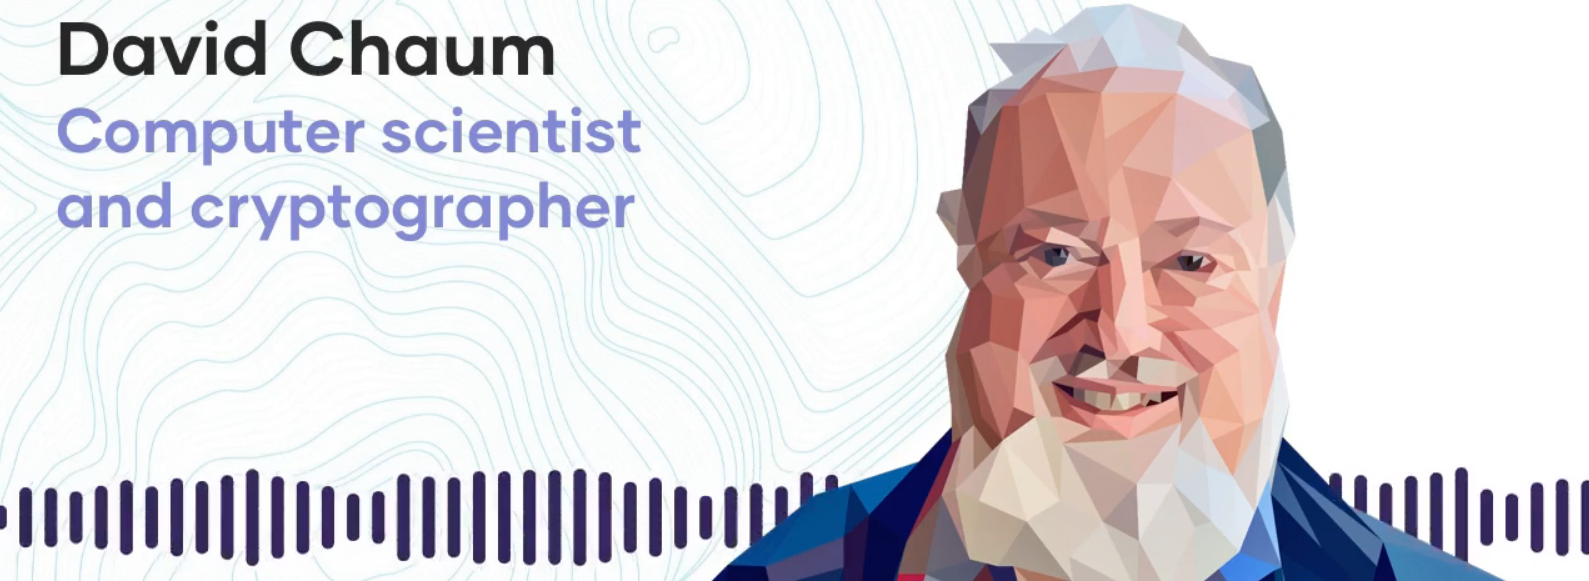 David Chaum - Forefather of Cryptocurrencies and the Cypherpunk Movement